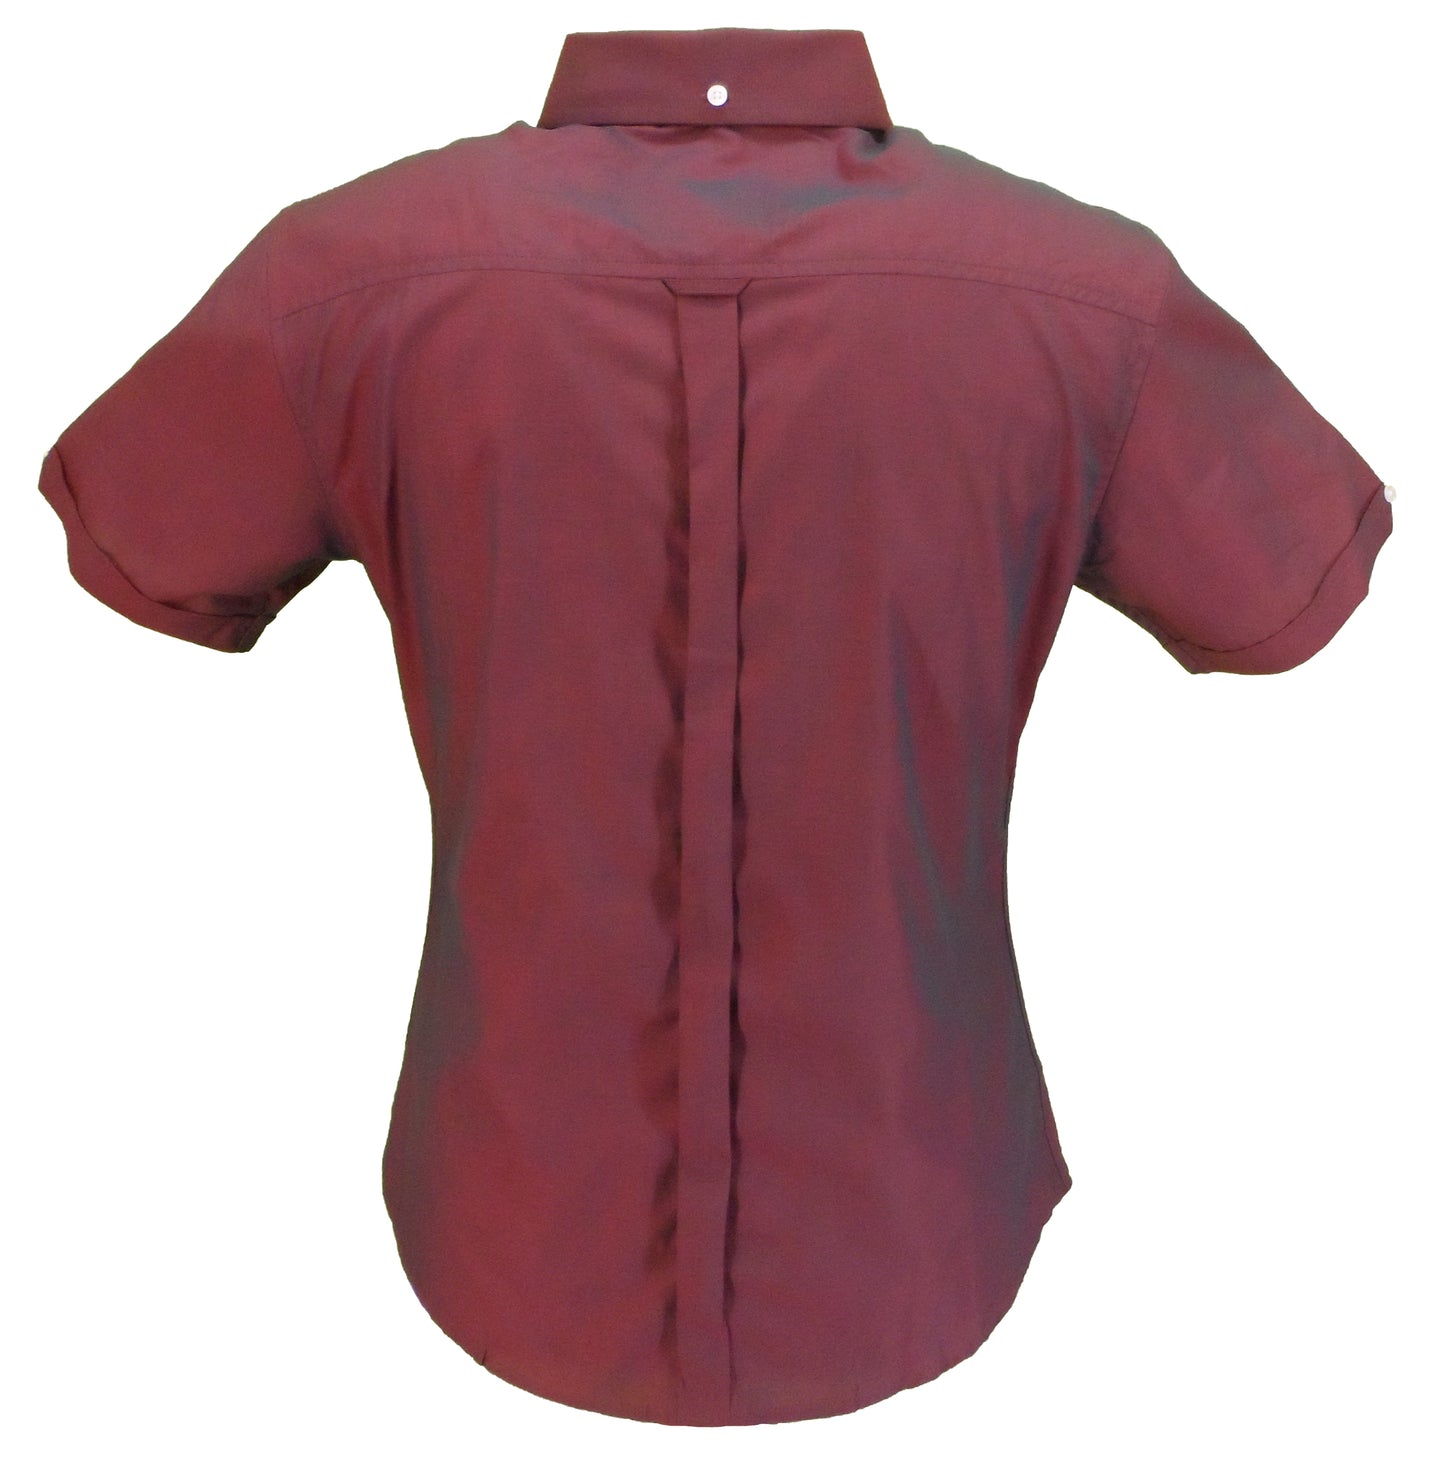 Relco Ladies Burgundy Black Tonic Button Down Short Sleeved Shirts